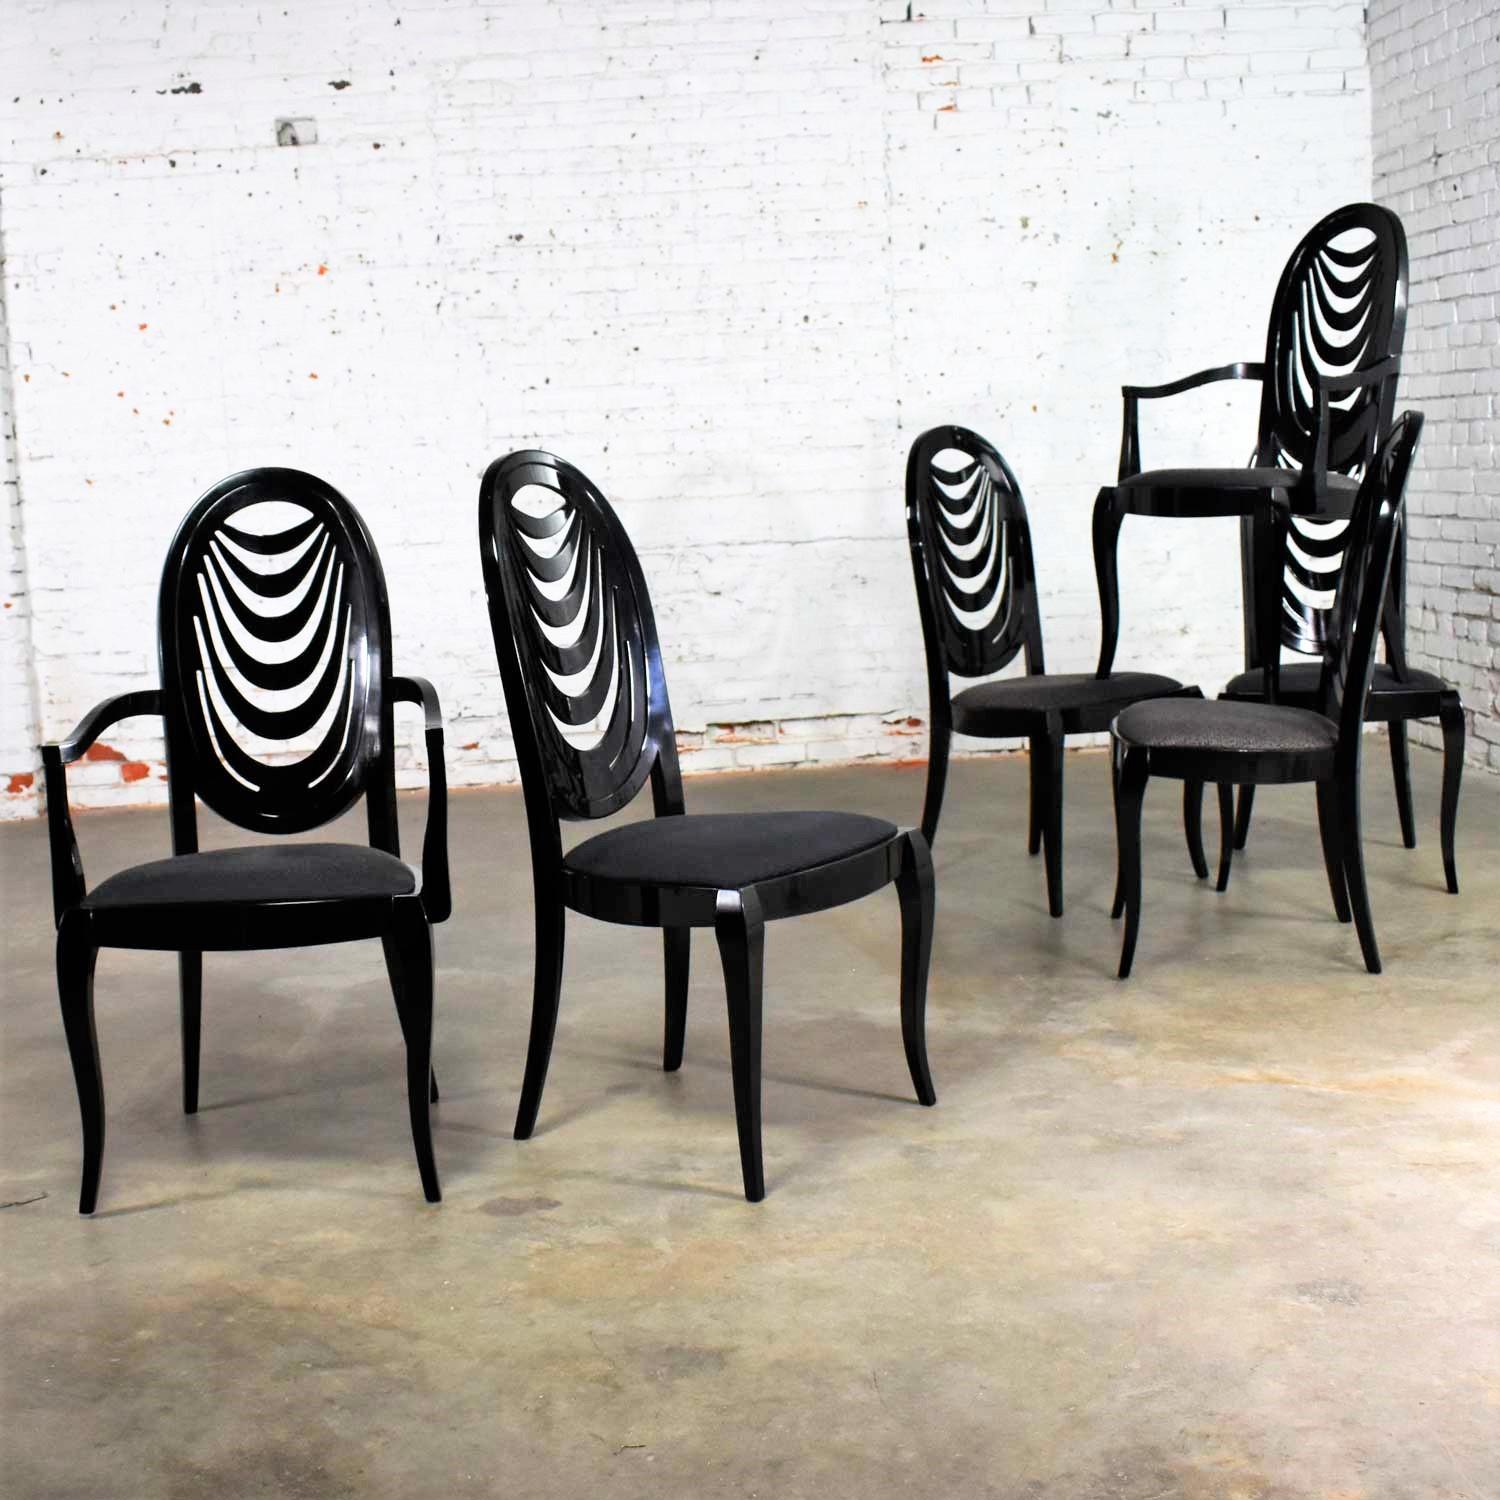 Black Lacquer Oval Drape Back Dining Chairs, Pietro Costantini for Ello Set of 6 3